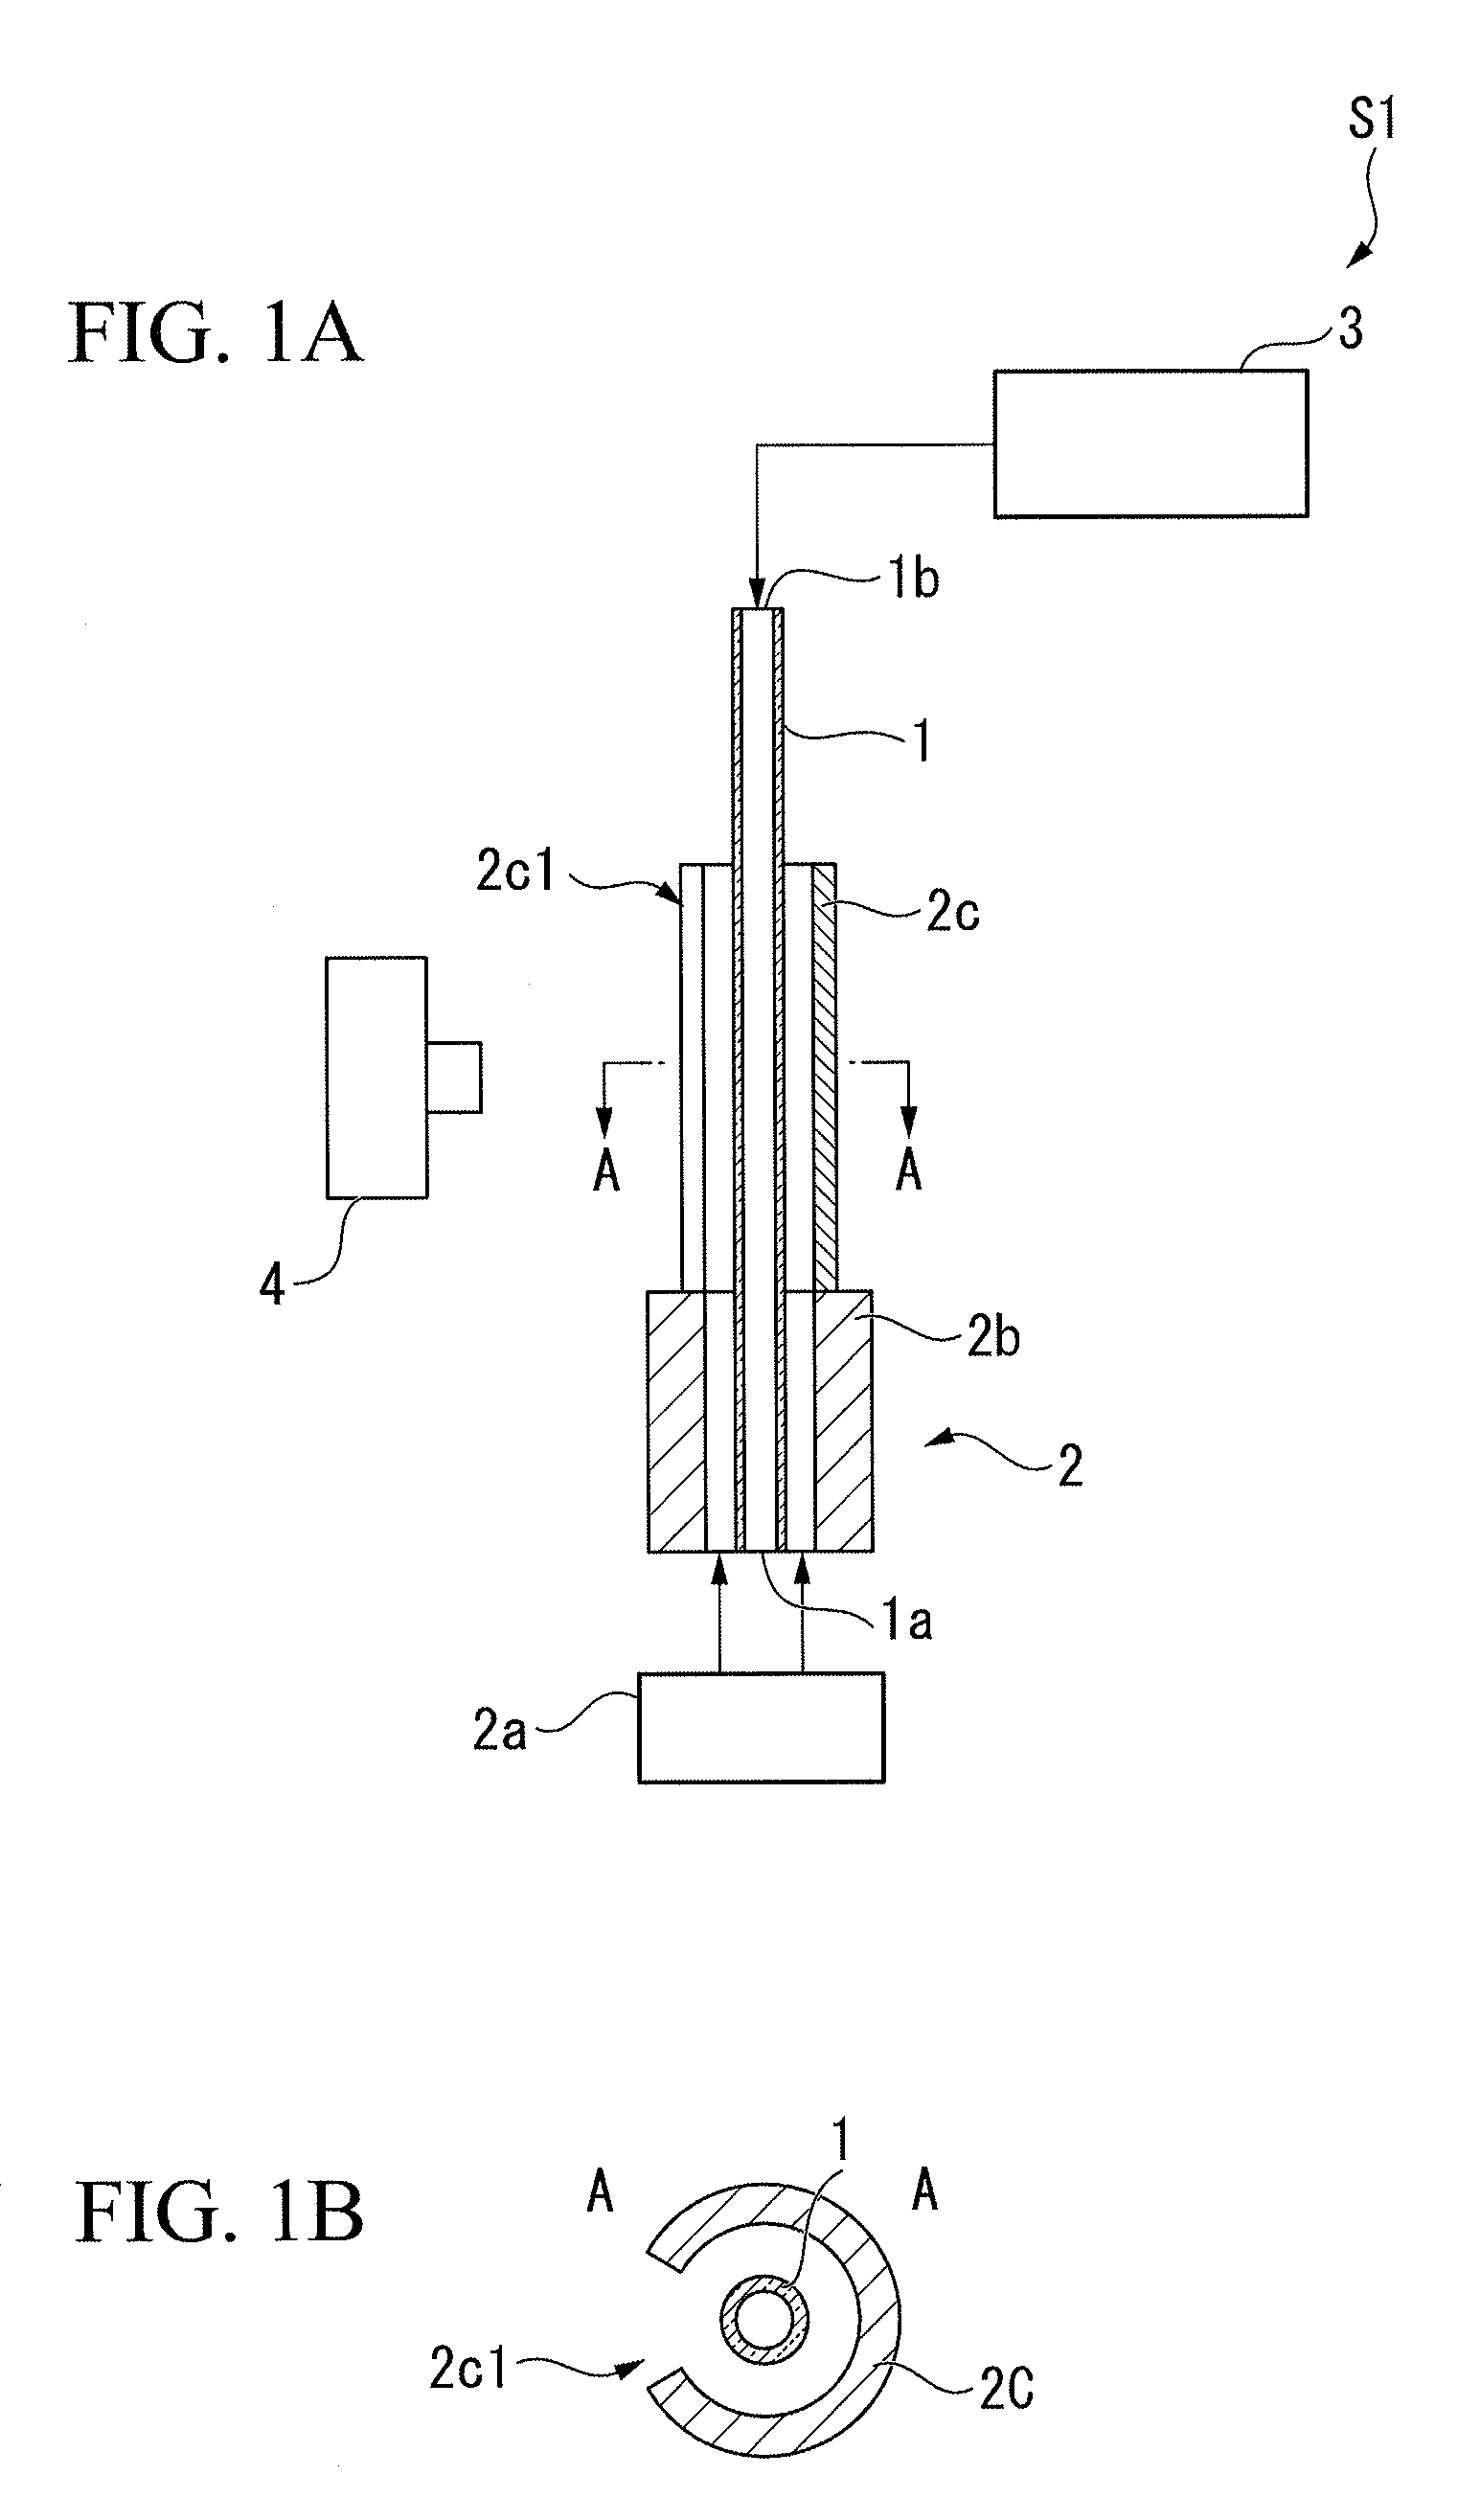 Combustion experimental apparatus